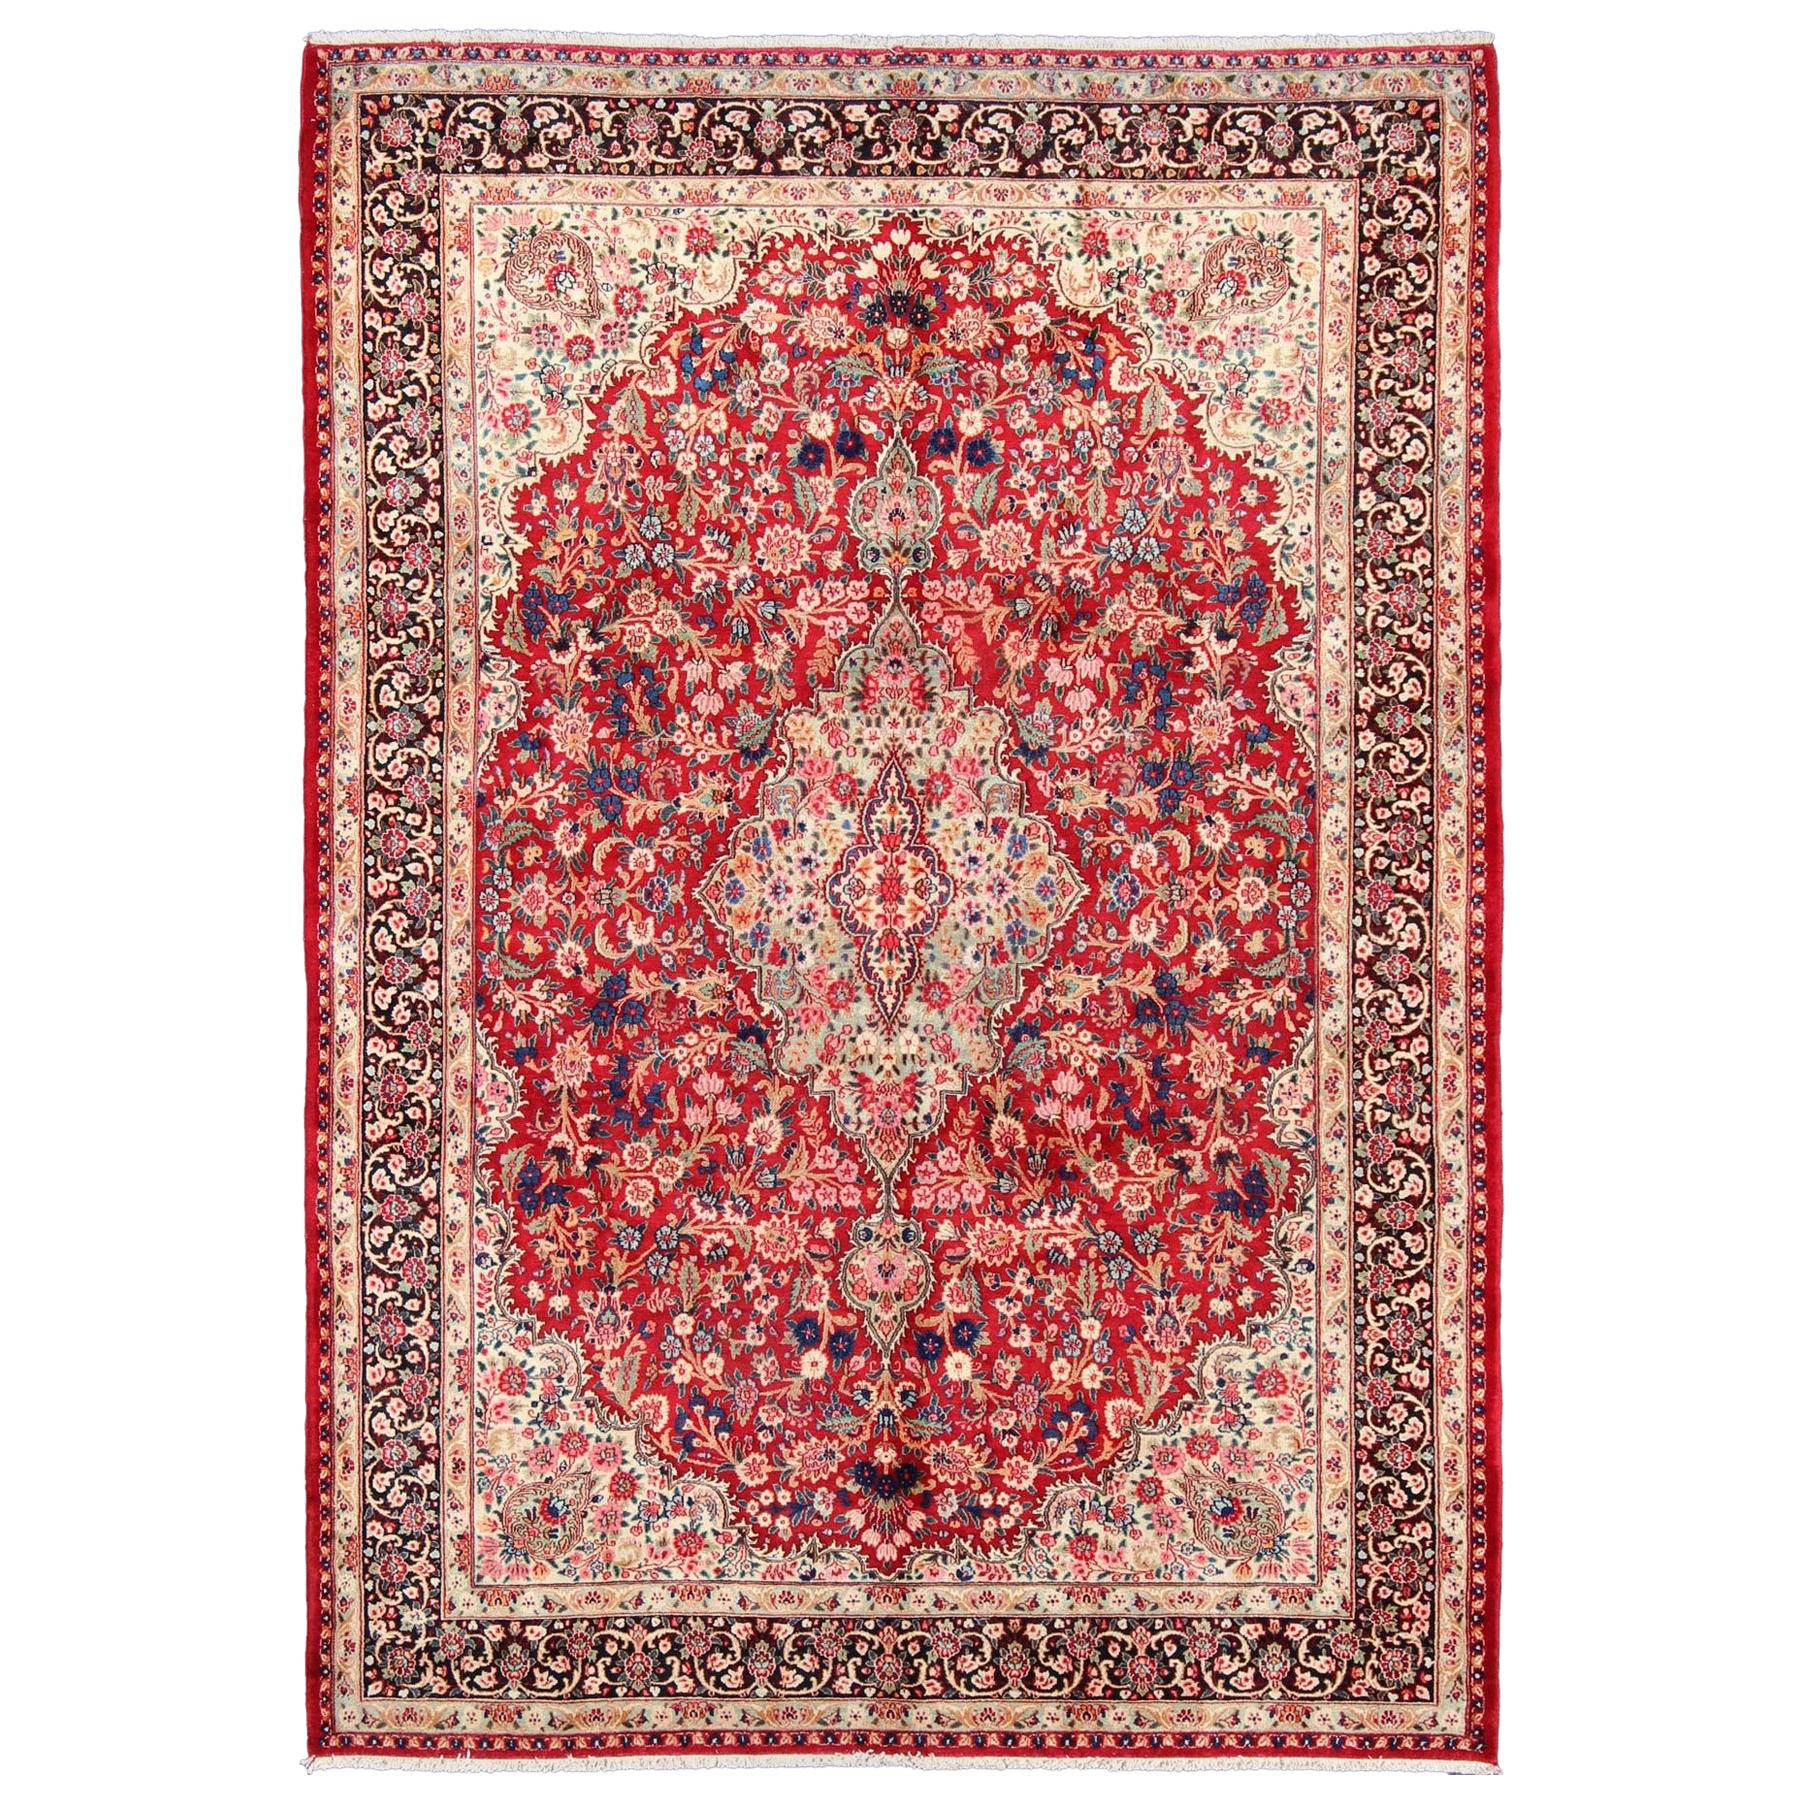 Vintage Persian Mashad Rug with Ornate Floral Medallion Design in Red and Cream